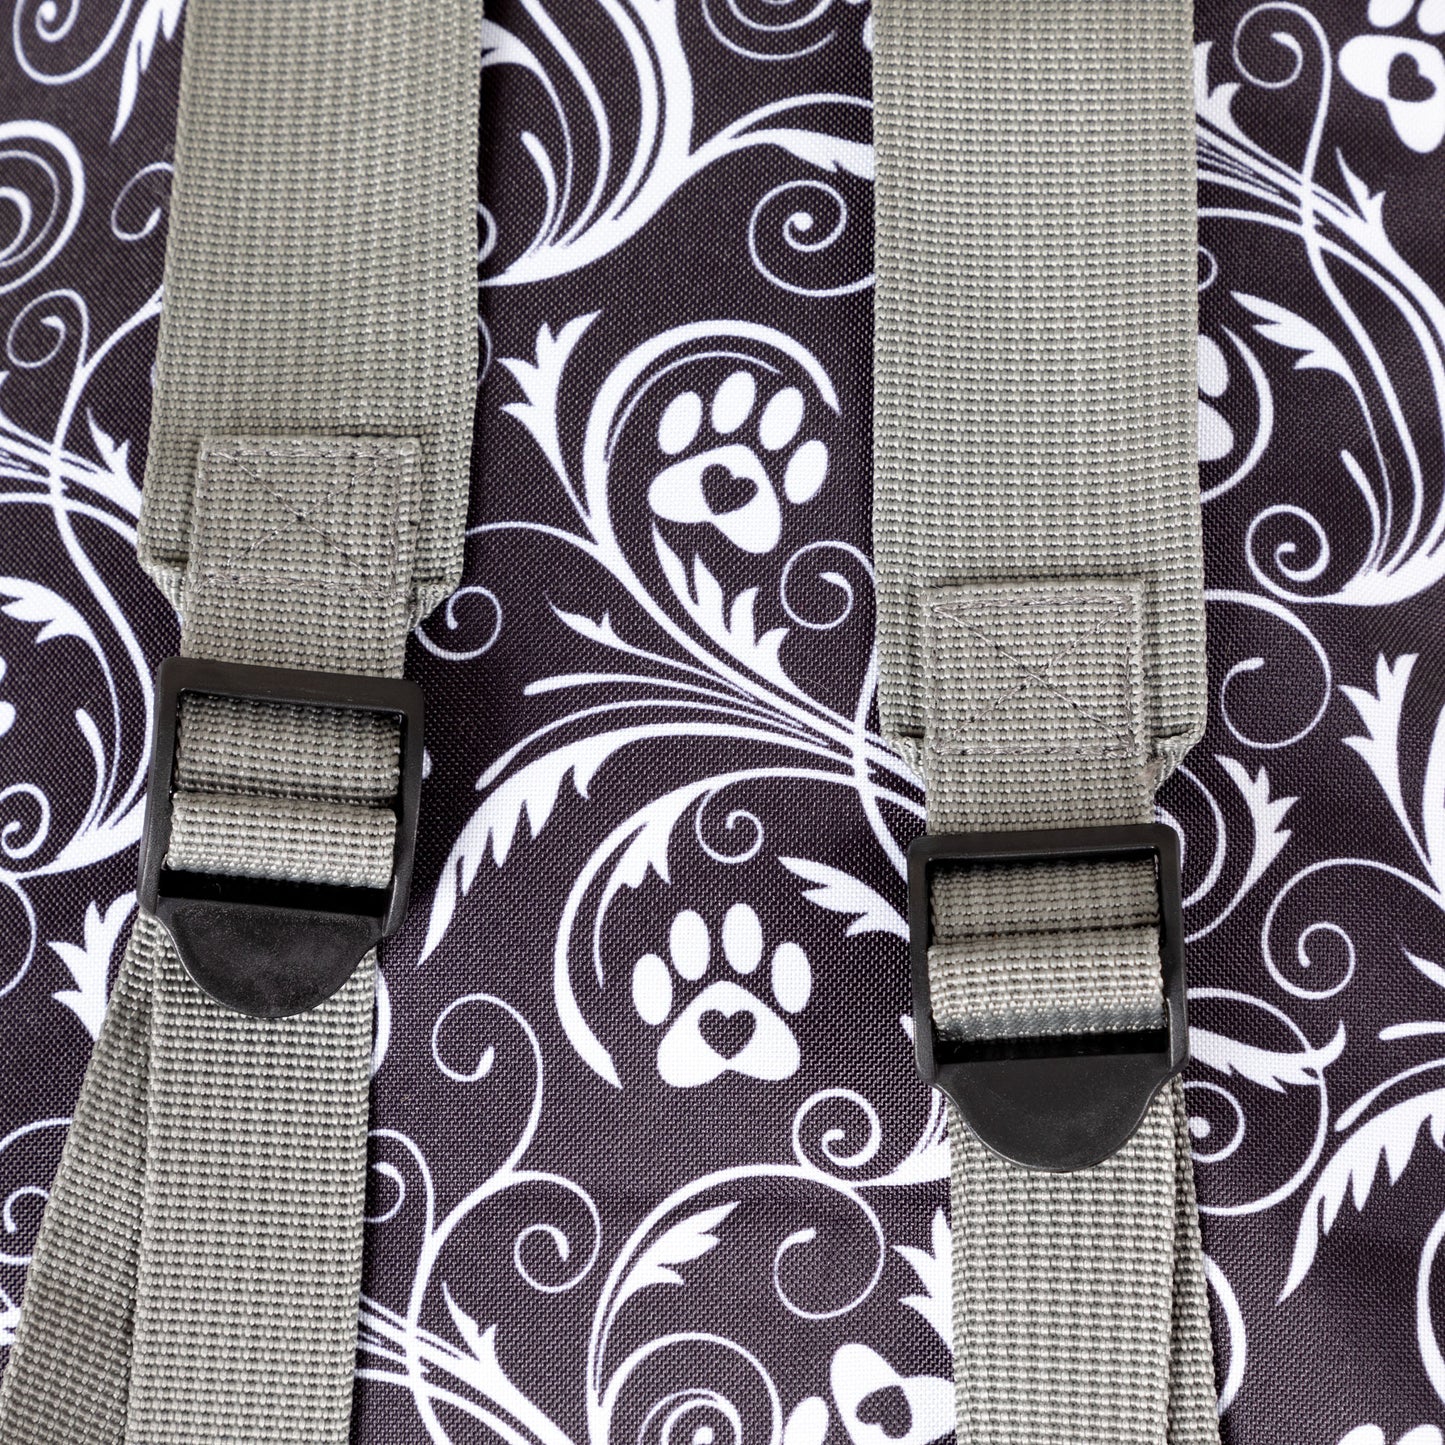 Paw Print Packable Backpack